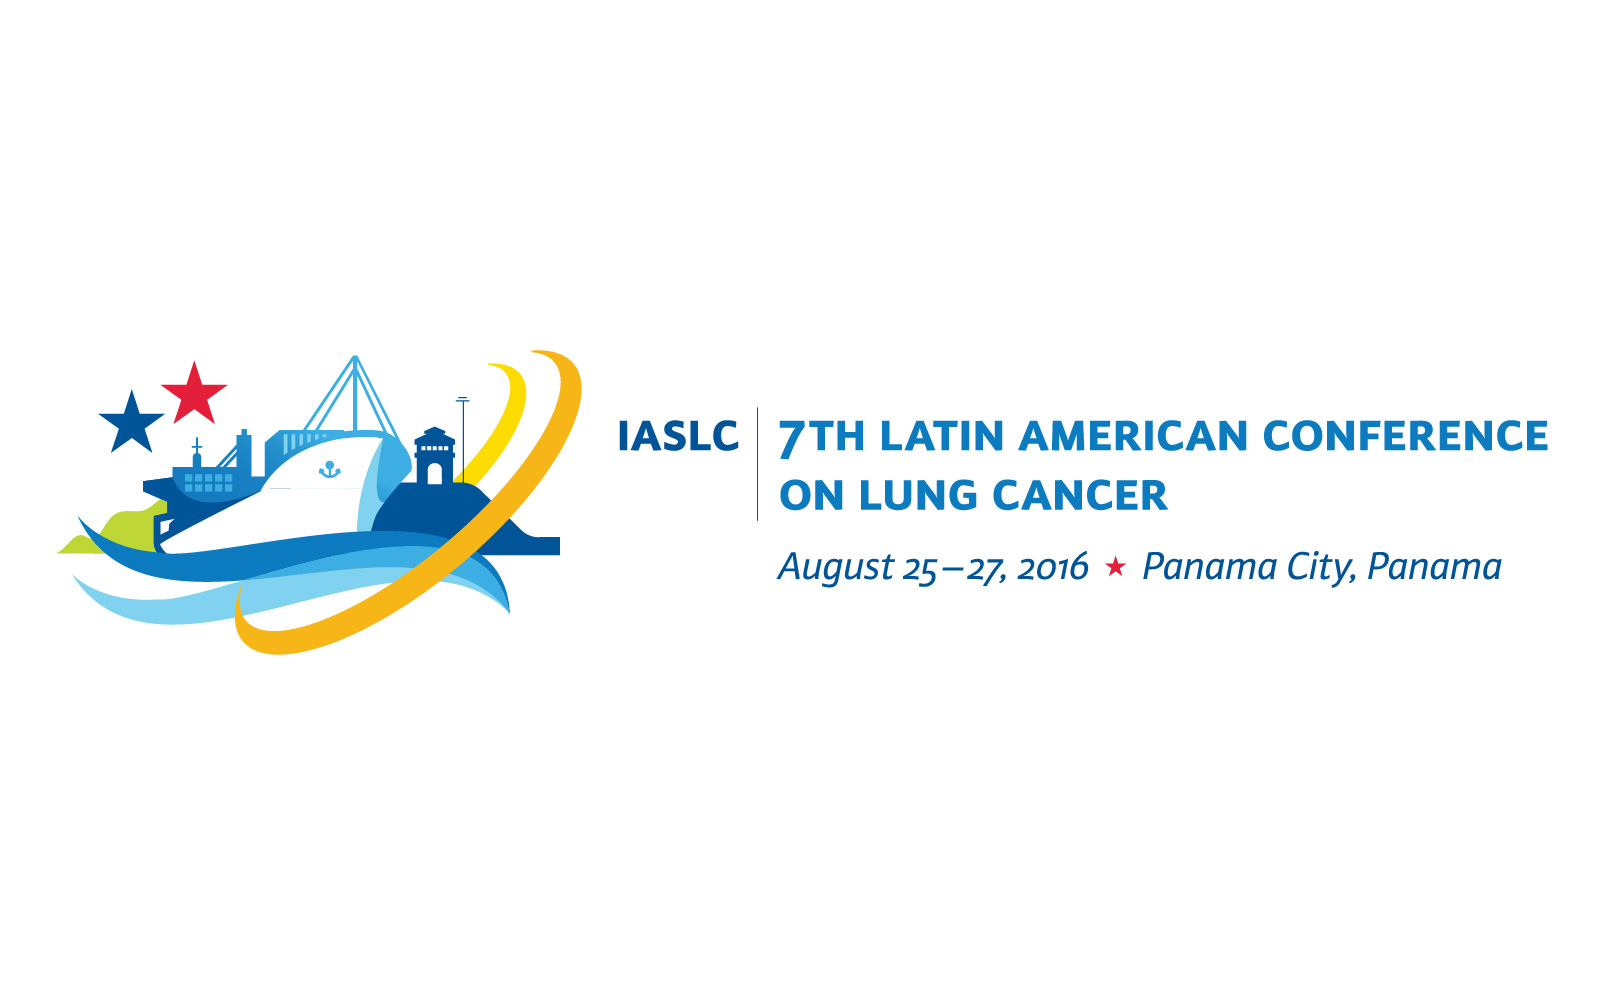 7th Latin American Conference on Lung Cancer